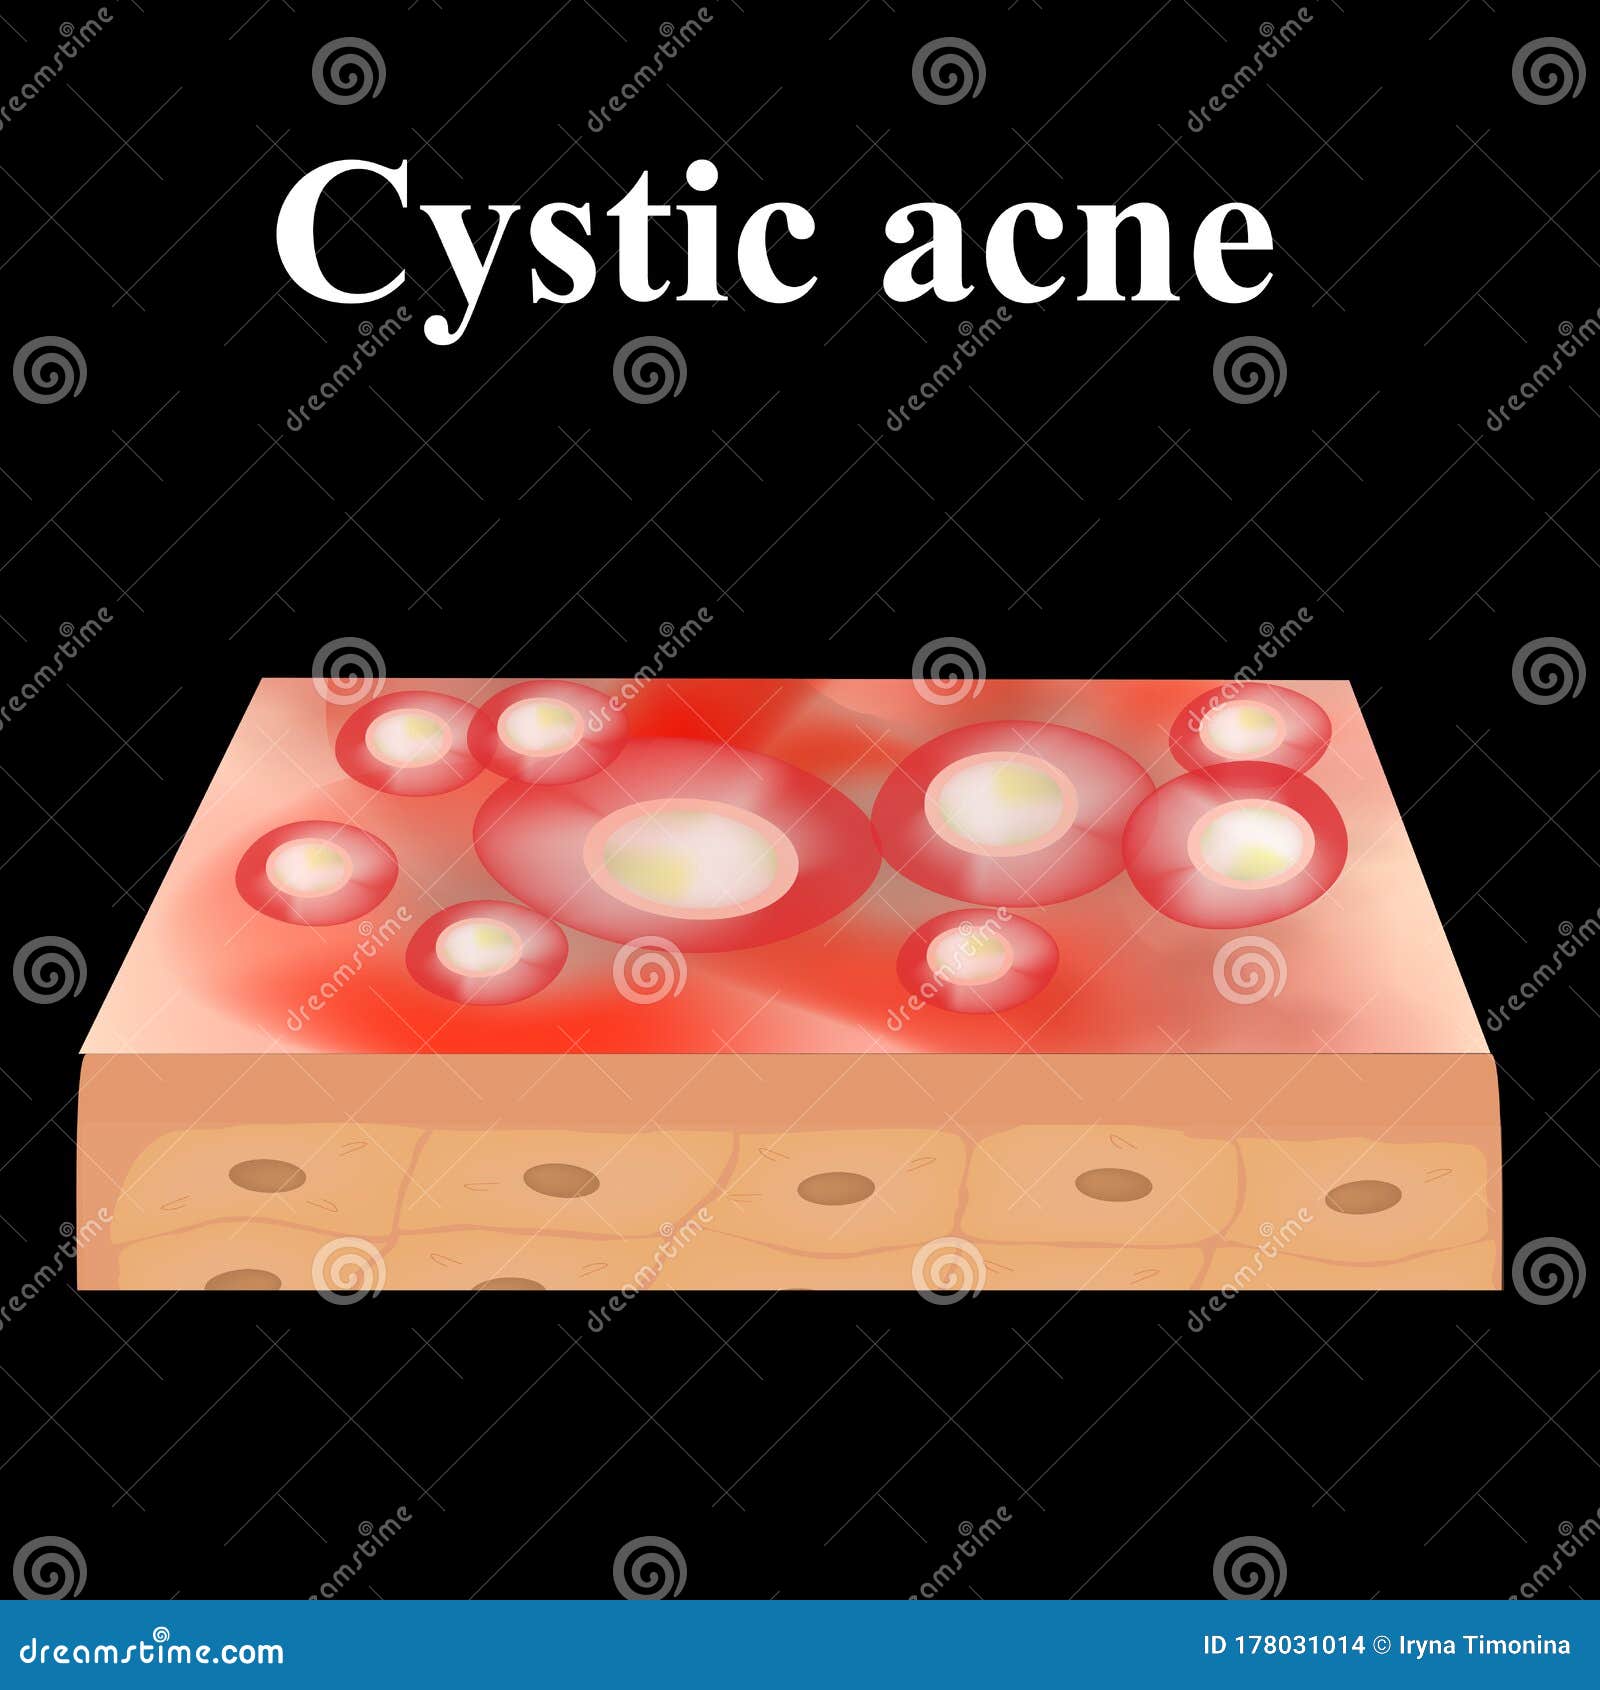 Cyst Acne. Acne On The Skin Of A Cyst. Dermatological And Cosmetic ...